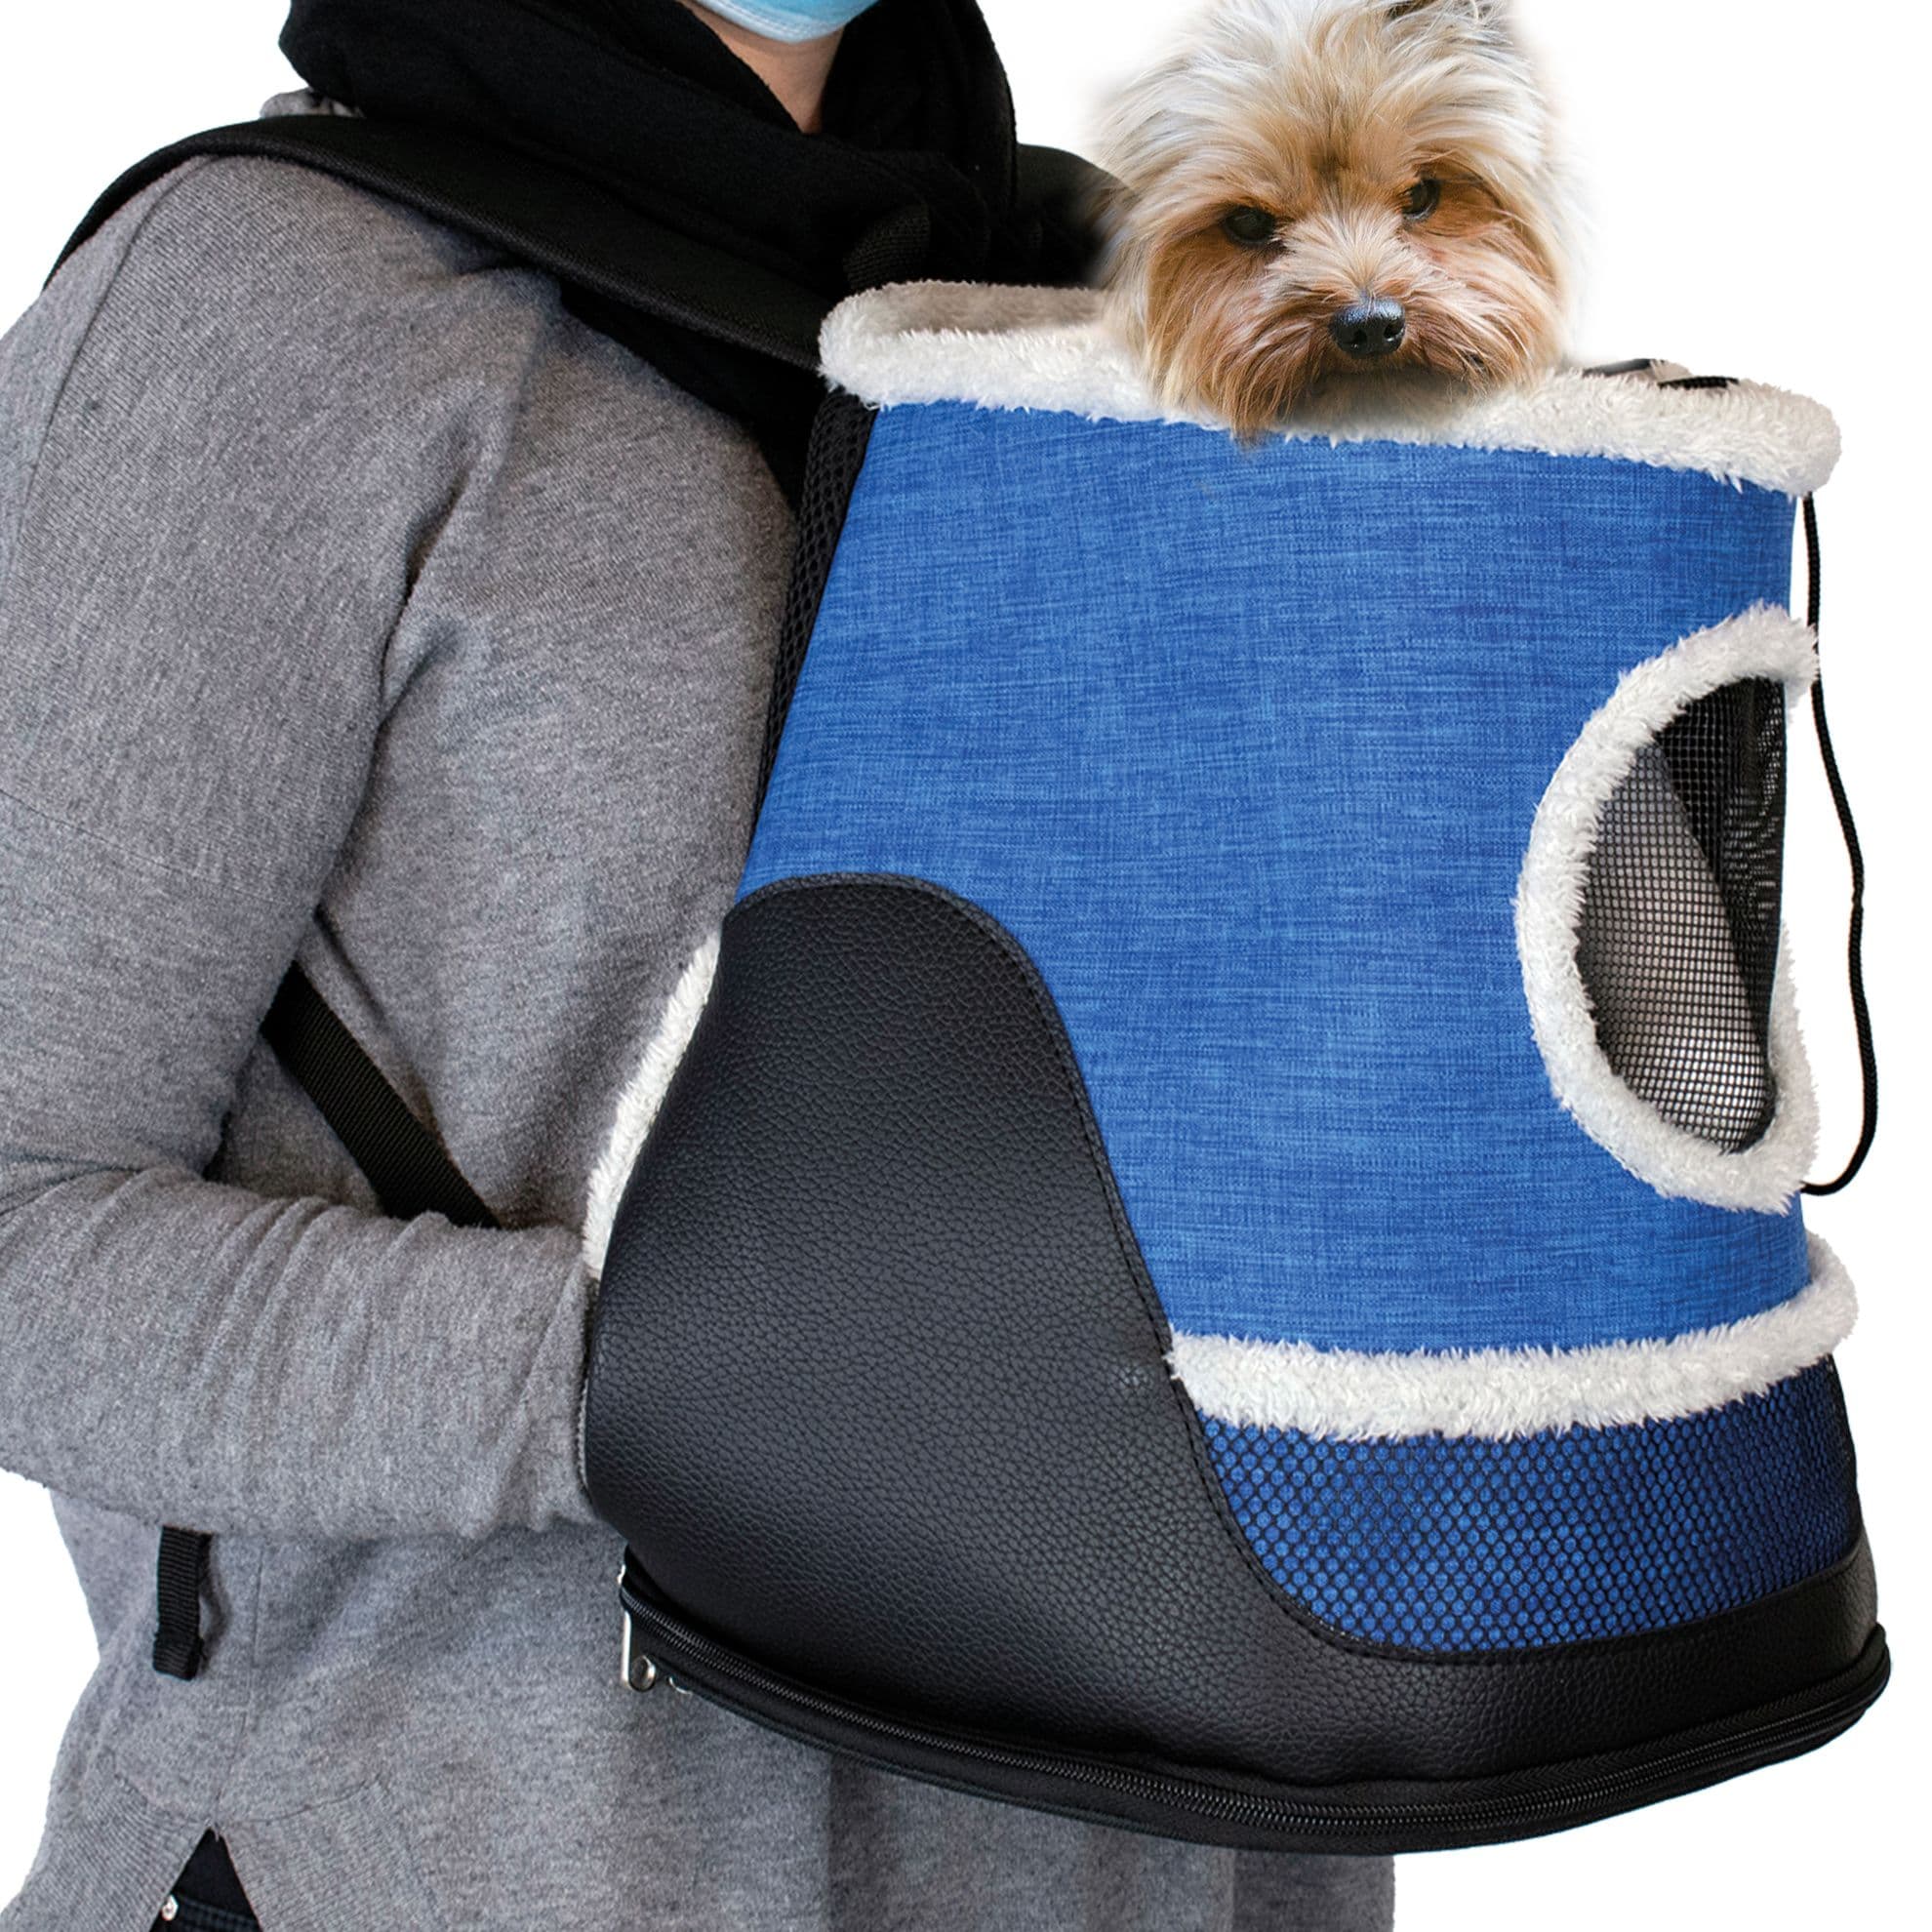 Sac transport pour chien ventral deluxe Vacation